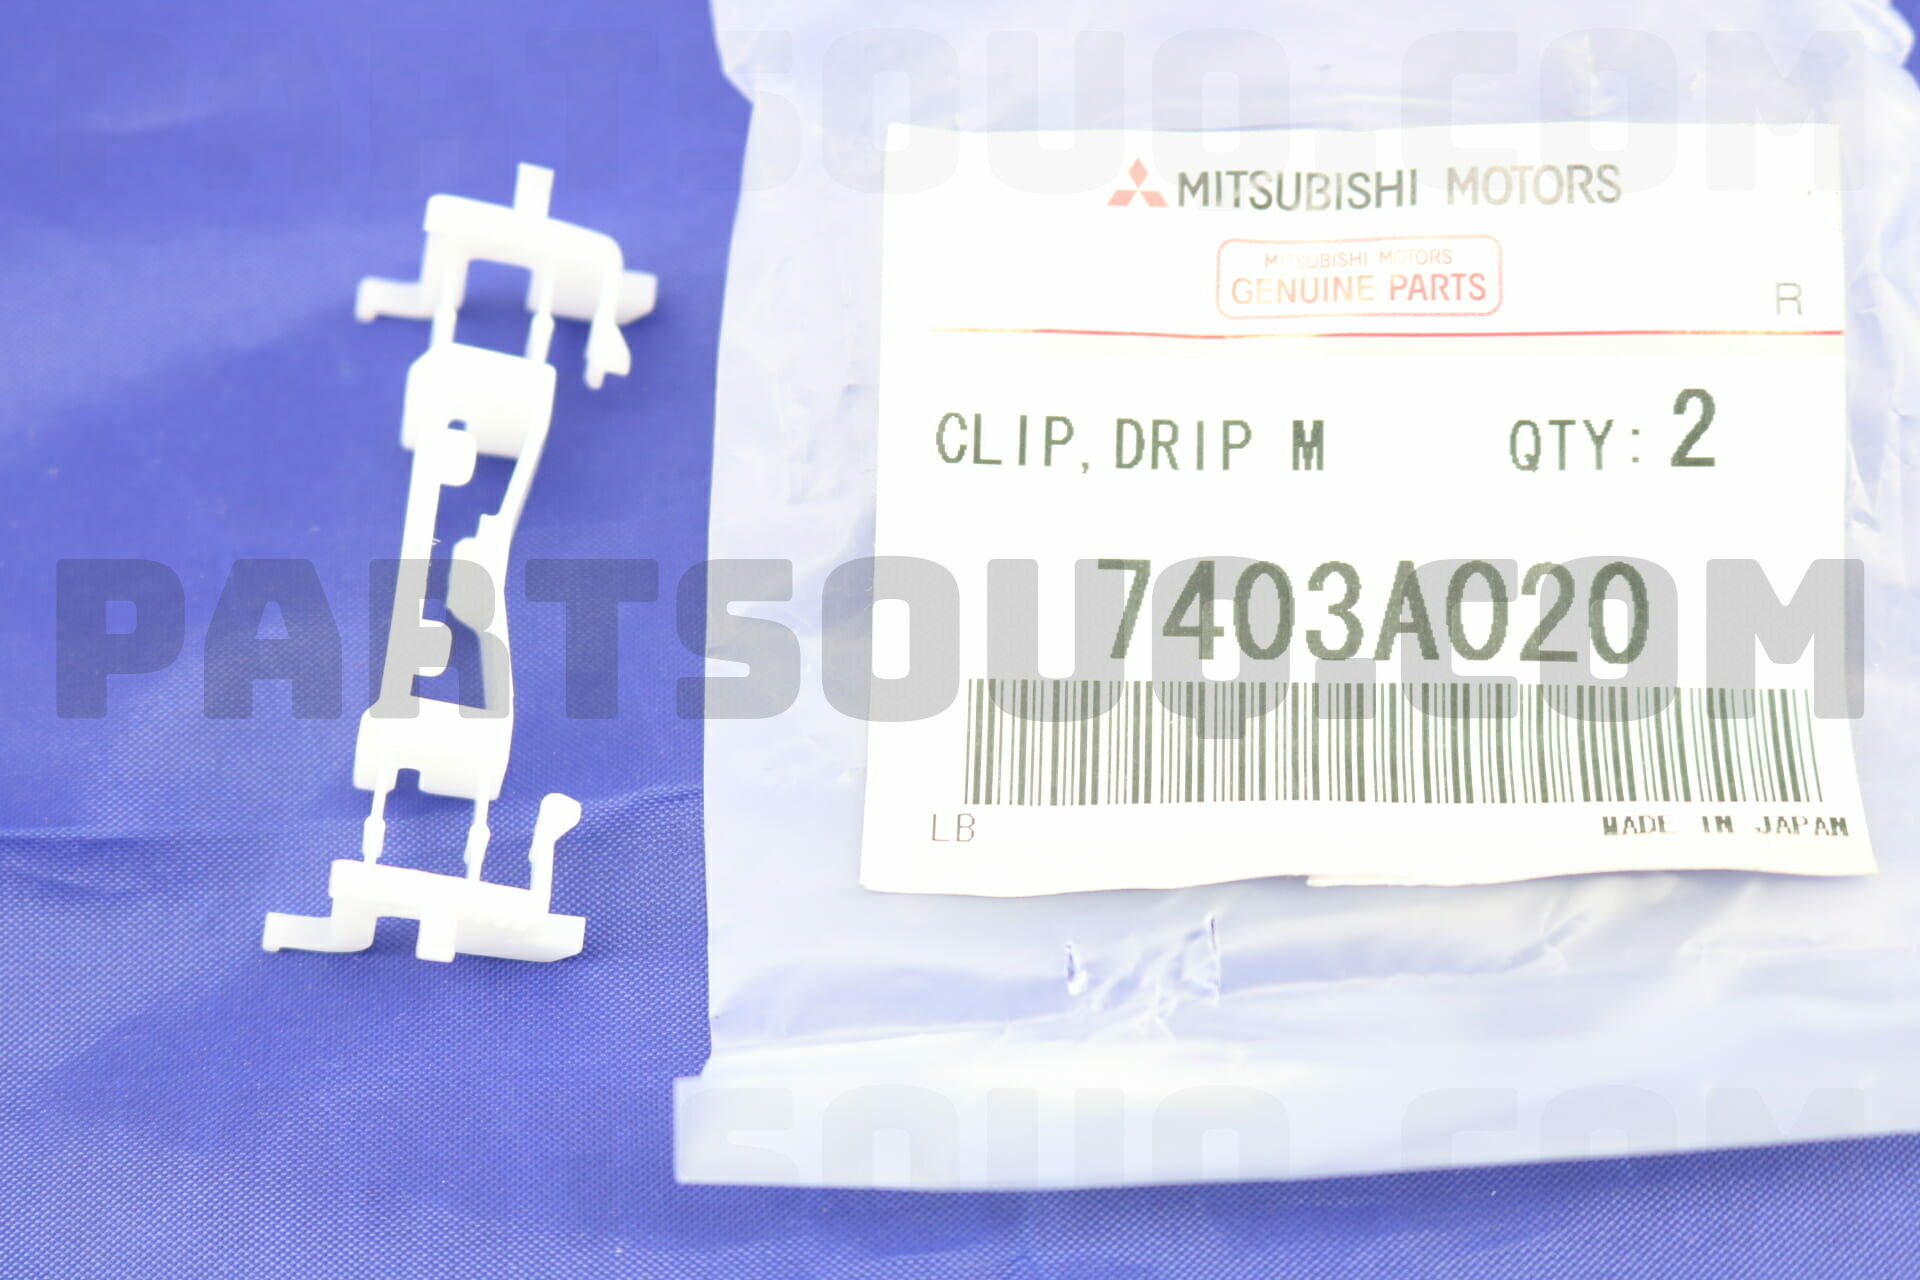 7403a0 Mitsubishi Clip Drip Moulding Price 1 19 Weight 0 005kg Partsouq Auto Parts Around The World